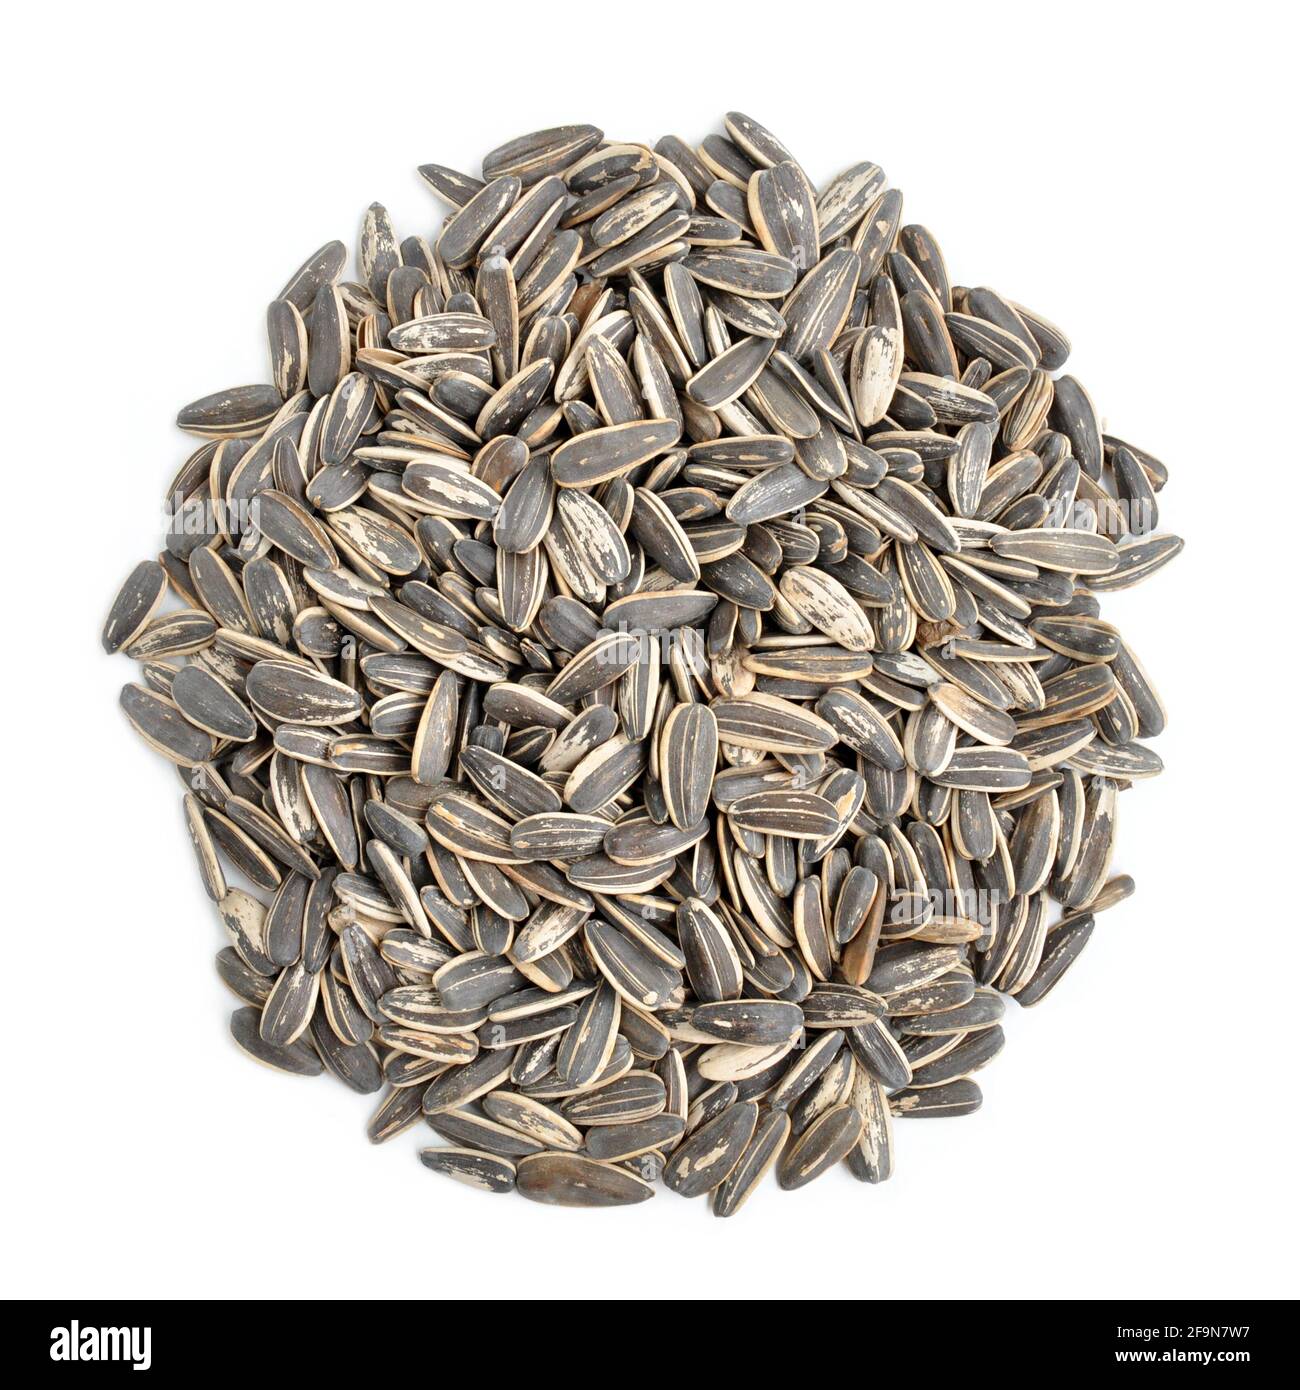 Sunflower seeds with shells Stock Photo